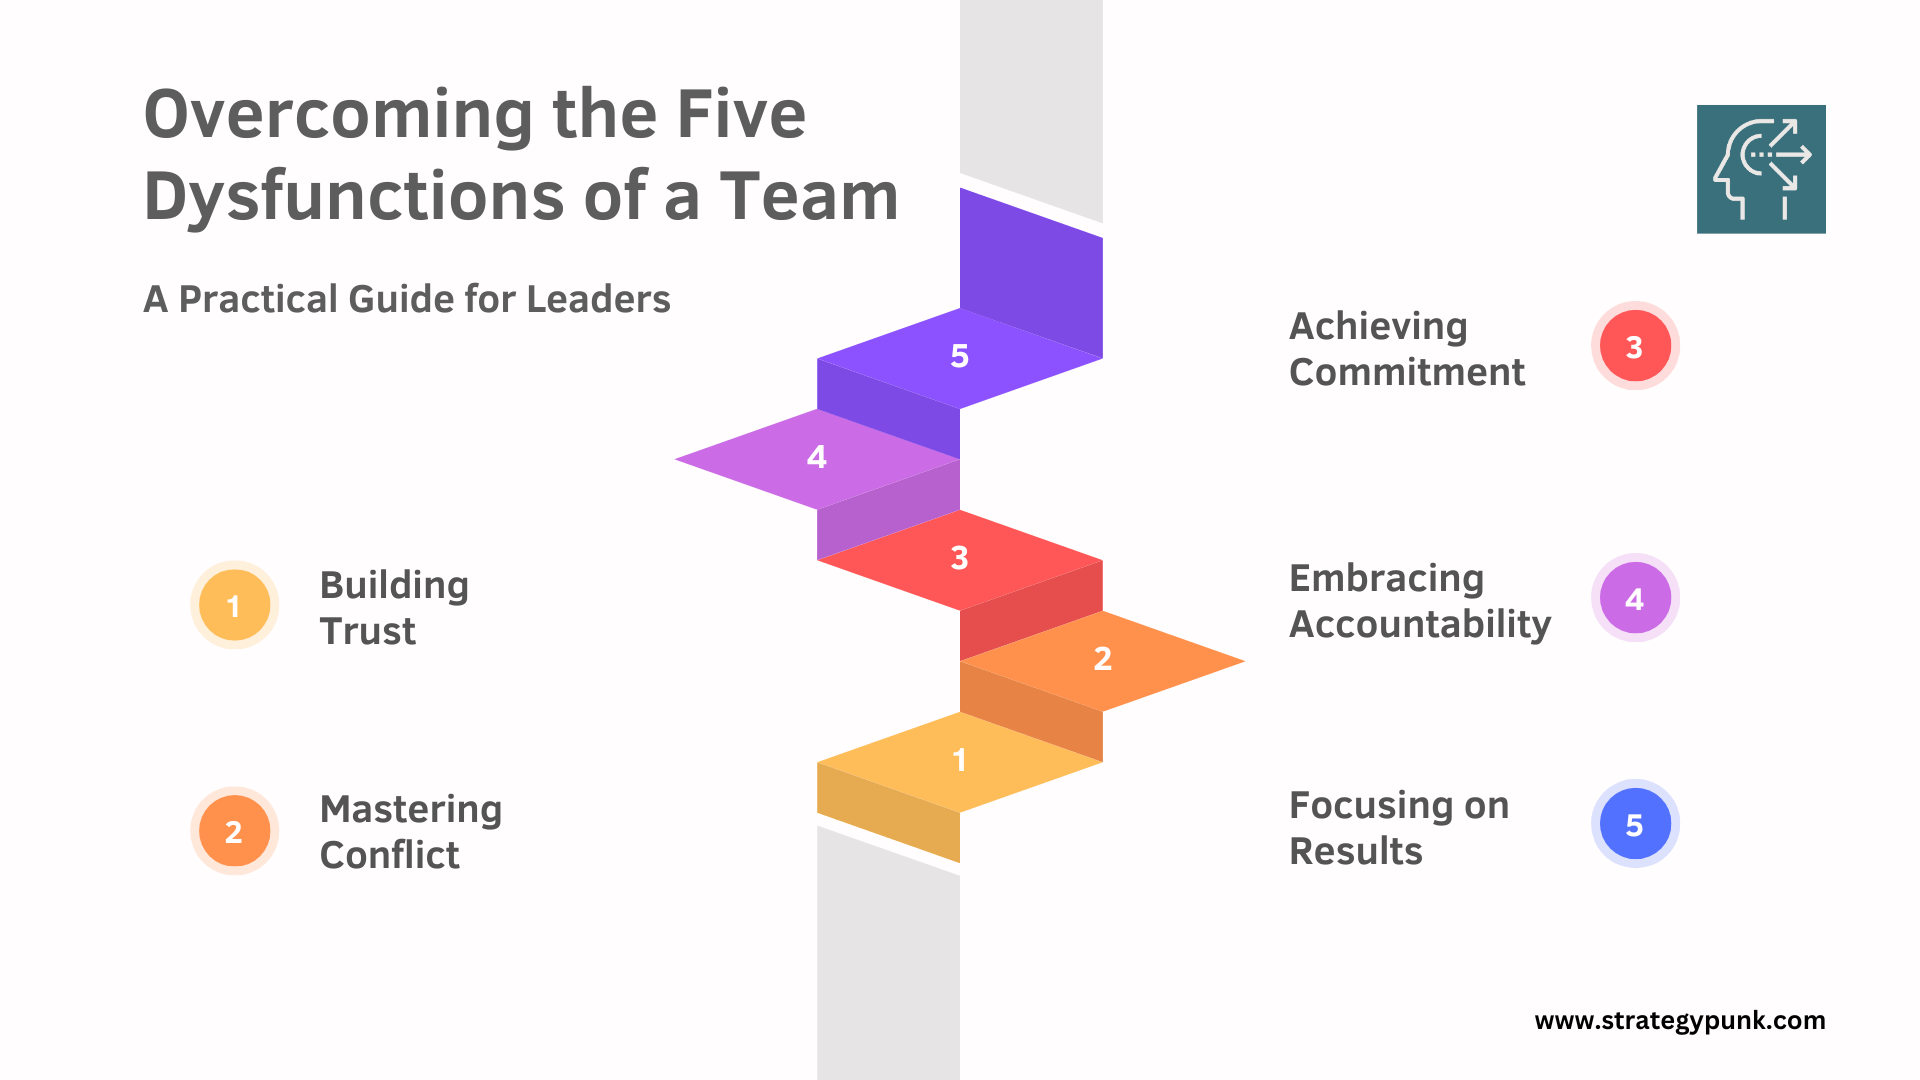 Overcoming the Five Dysfunctions of a Team: A Practical Guide for Leaders (Free Template)